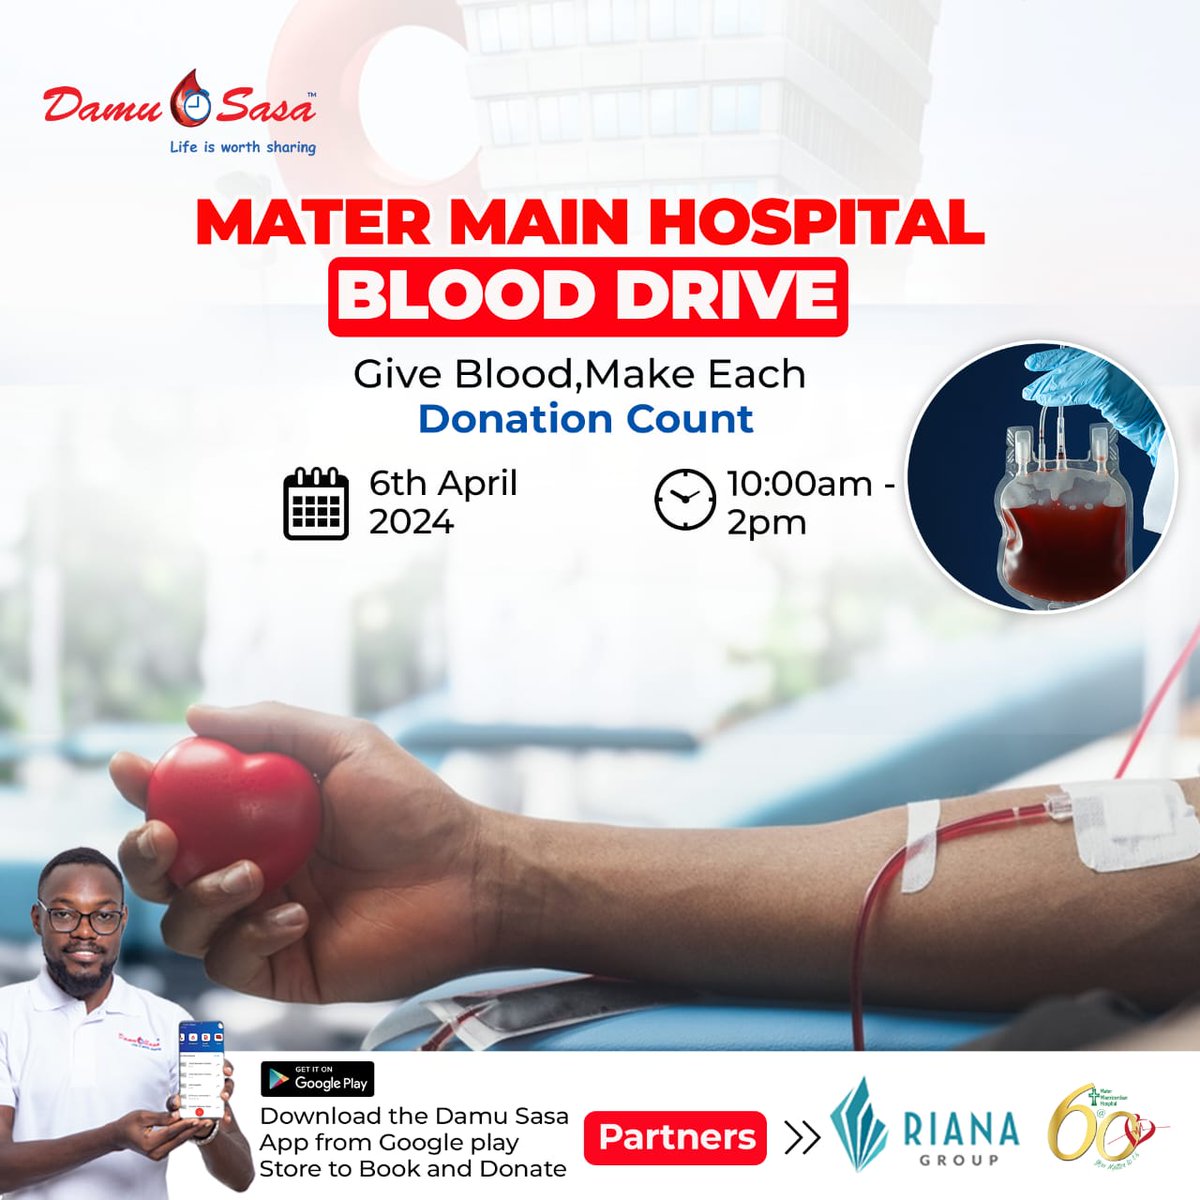 Join us today at Mater Main Hospital for a Blood Drive! Your generous donation can make a life-saving difference.

#Savelife #MaterHospital #DamuSasa